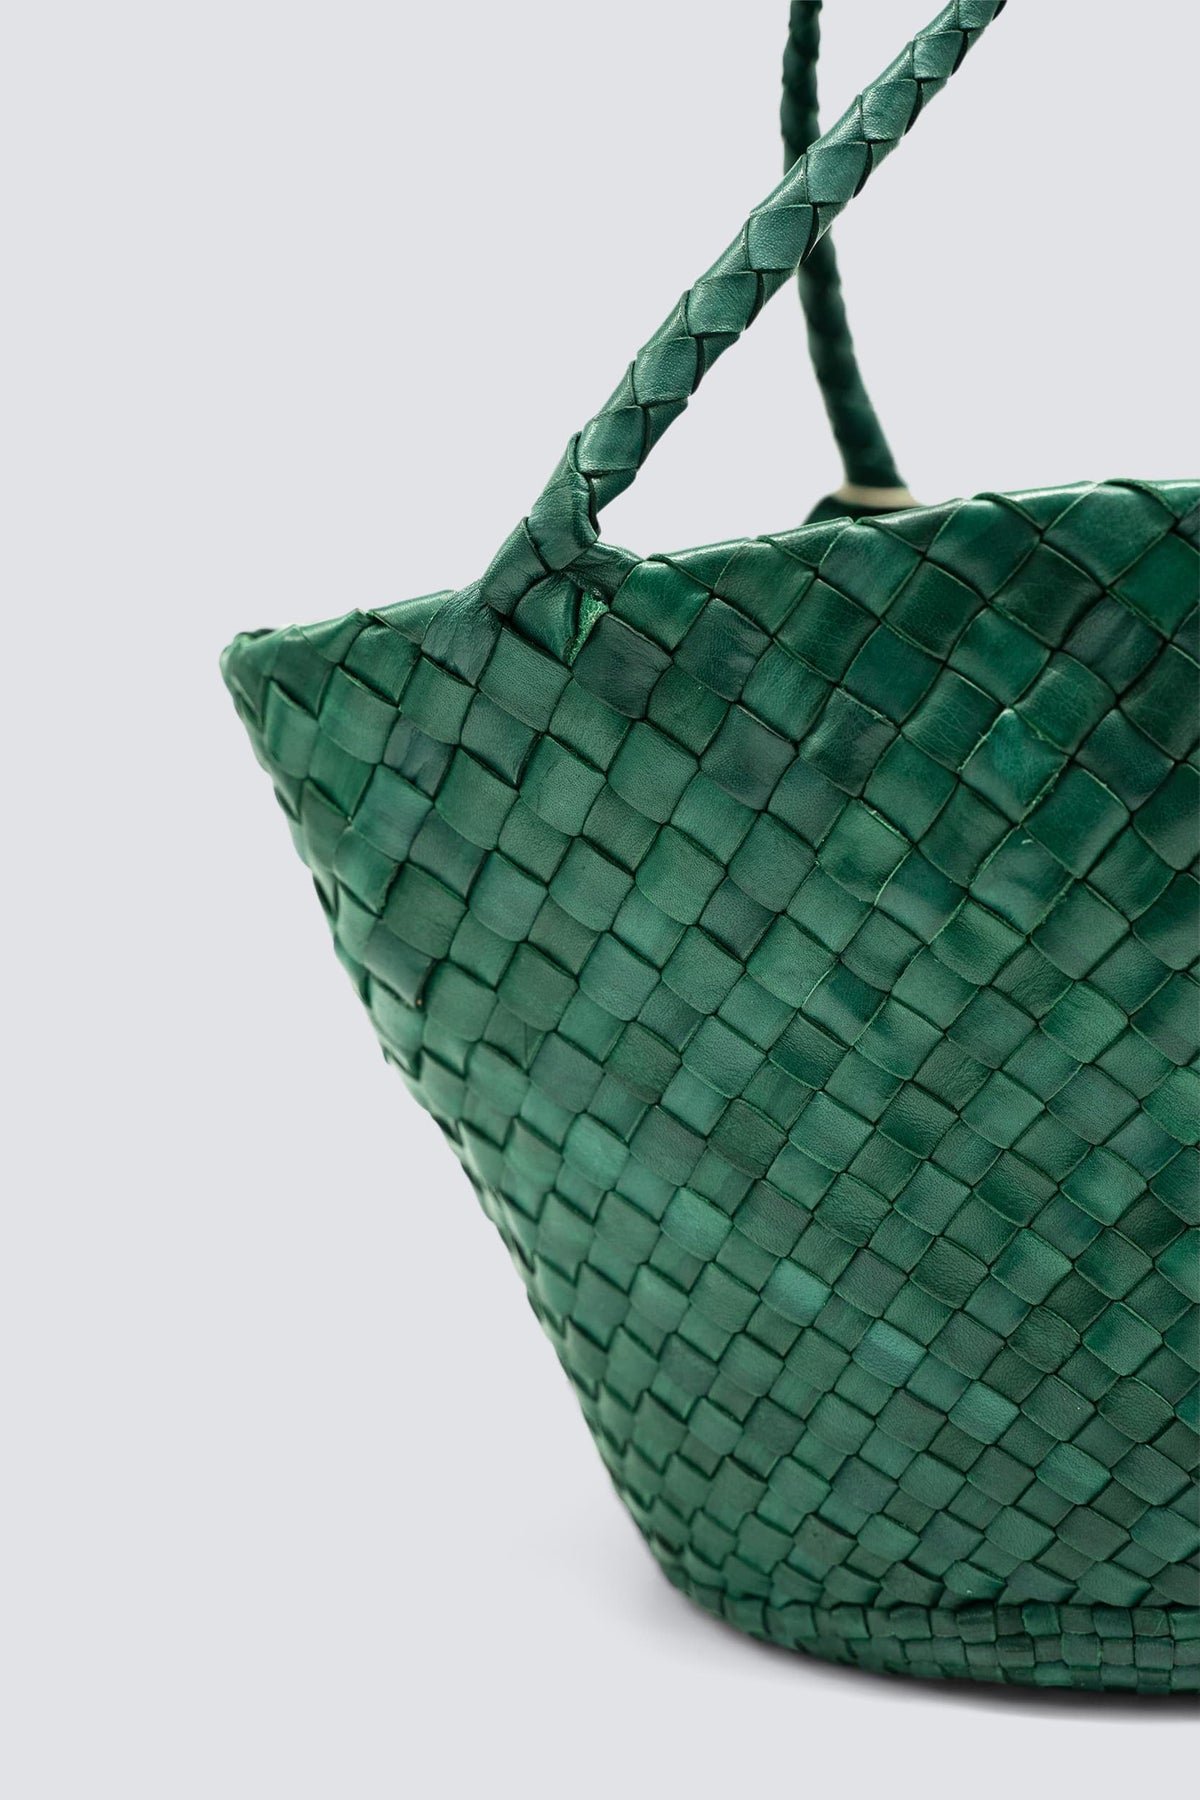 Dragon Diffusion - Egola Forest Green Woven Leather Bag